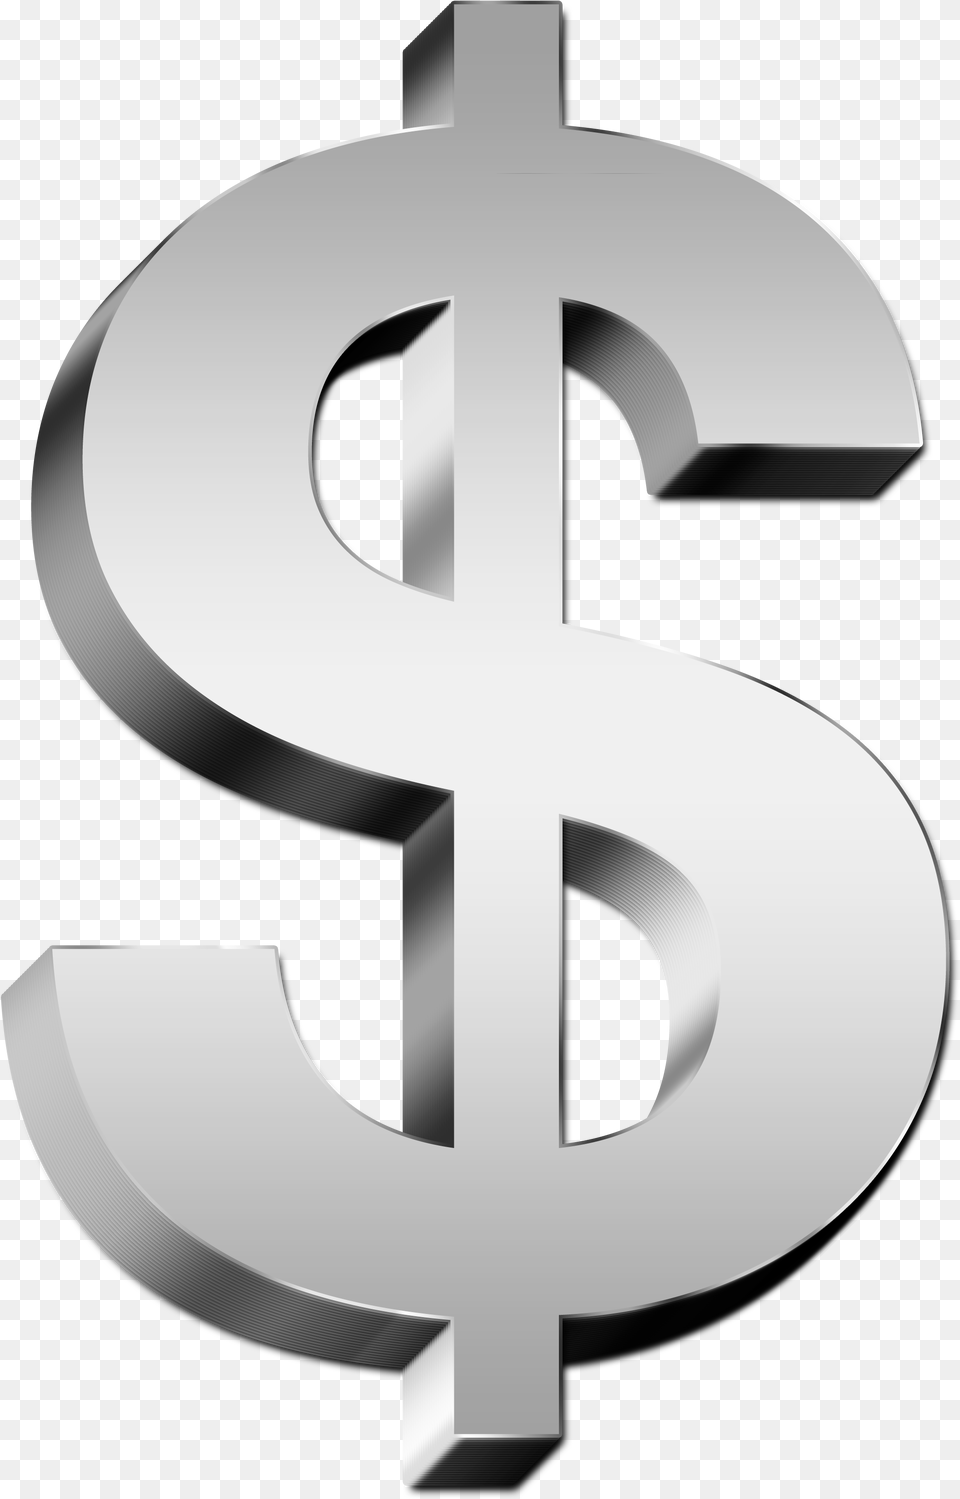 Silver Dollar Sign Image For Download Silver Dollar Sign, Symbol, Text, Number, Cross Png